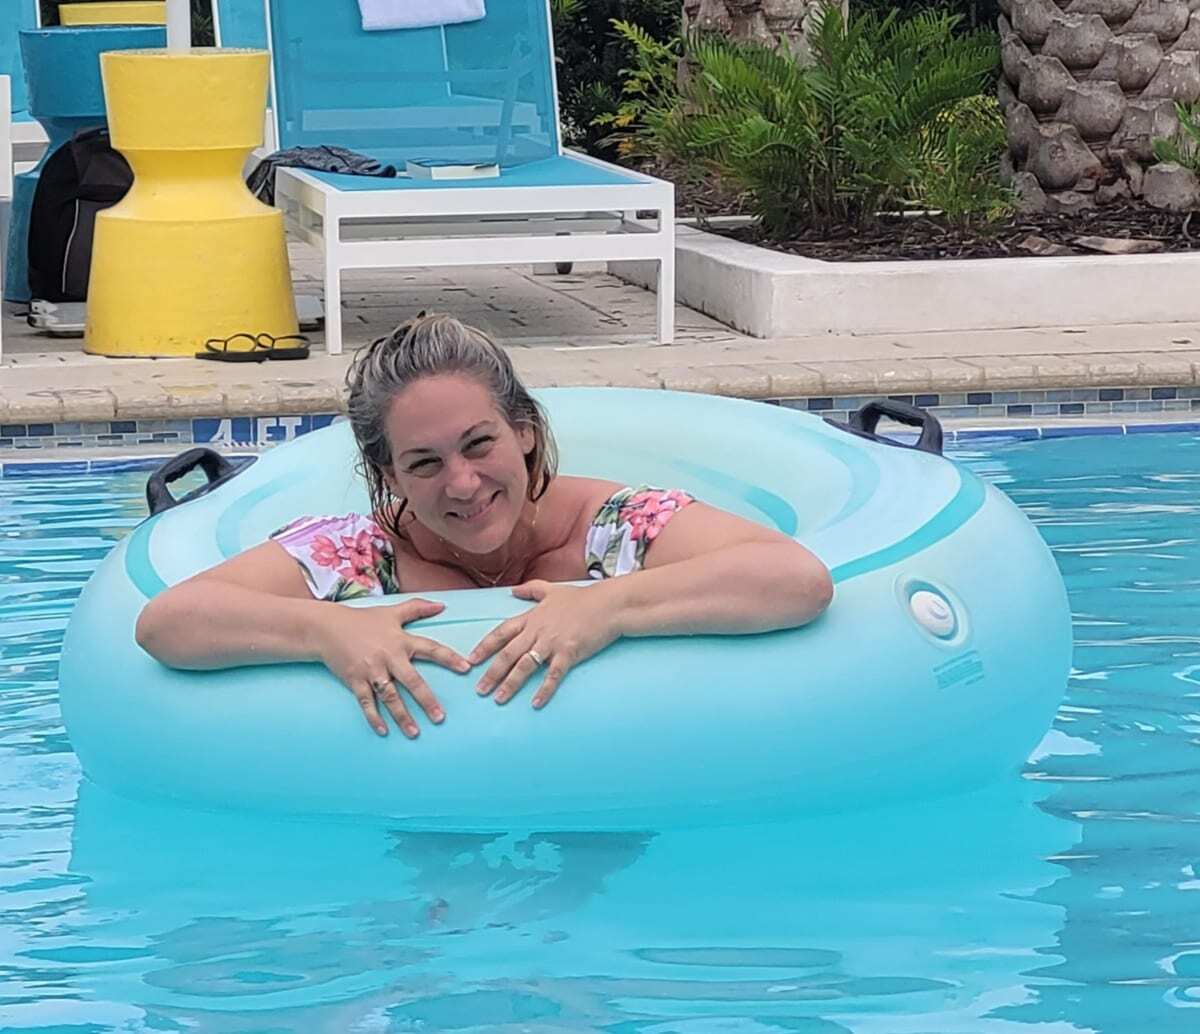 Woman smiling in a bathing suite while floating in a pool. Image: Finding Kathy Brown USA Travel Blogger at The Hilton Buena Vista Palace Resort Orlando, FL USA